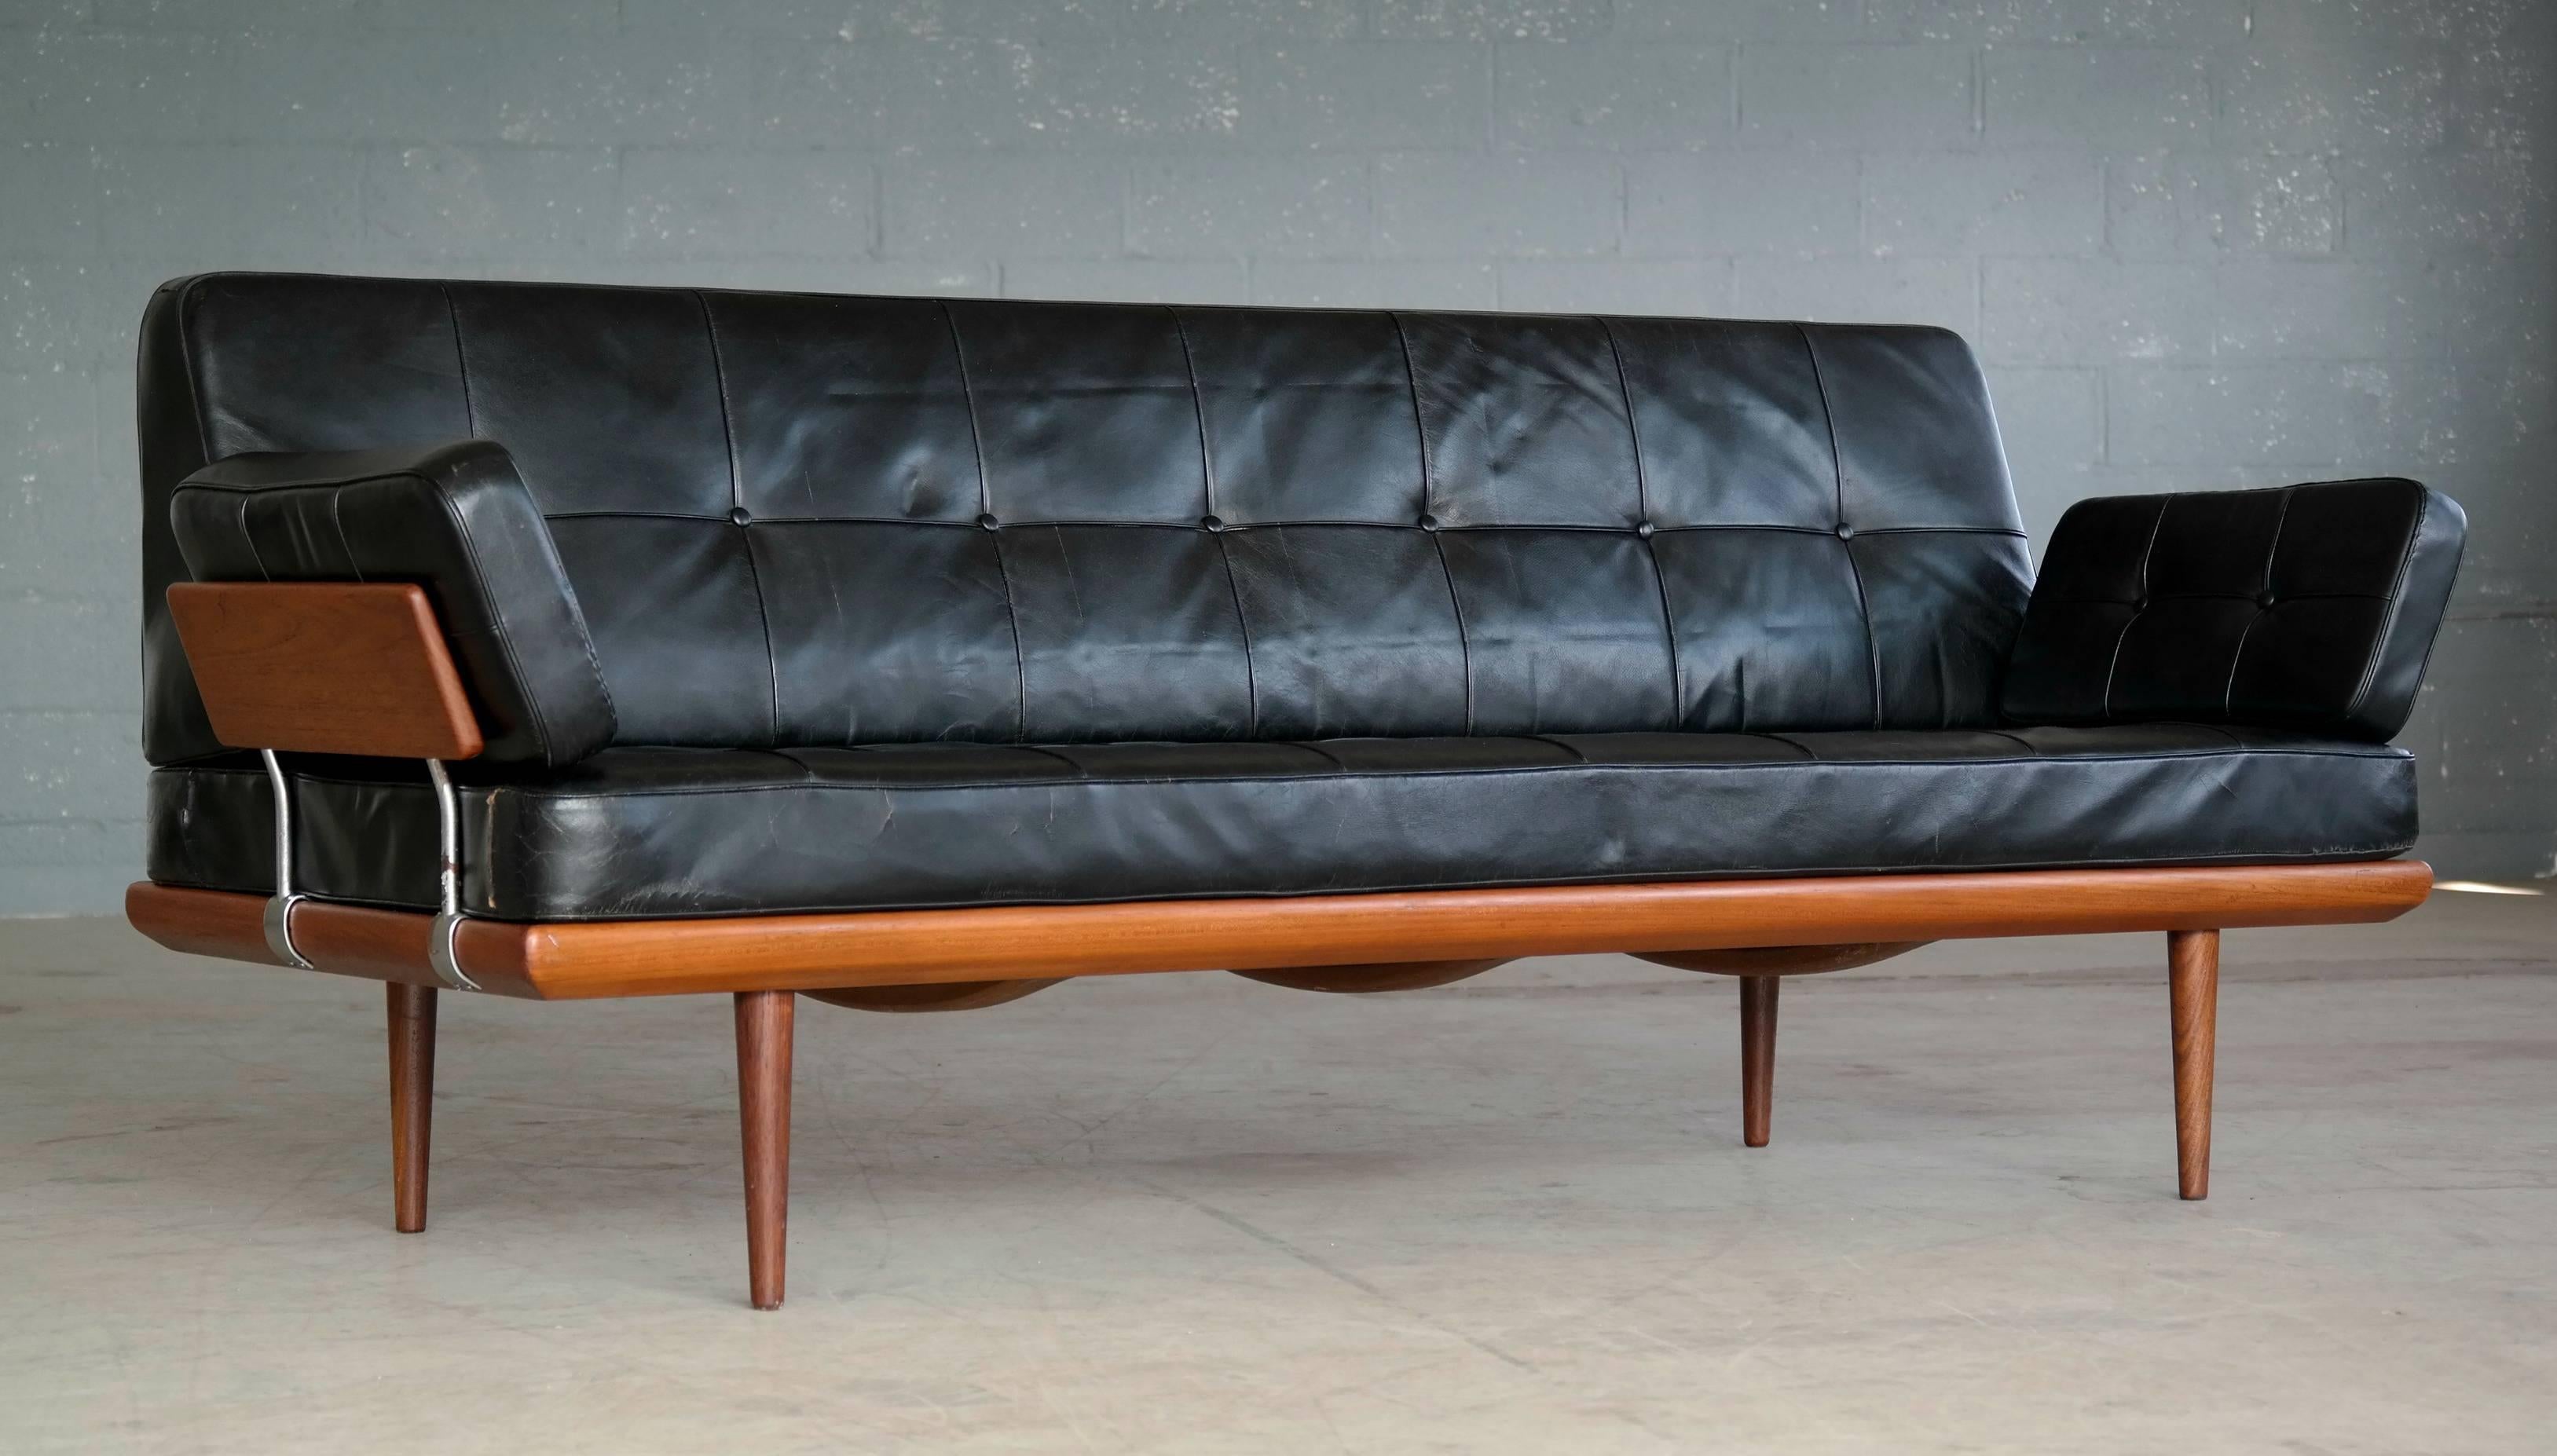 A model Minerva sofa/daybed one of the most Classic and sought after Danish sofas from the famous design duo of Peter Hvidt and Orla Mølgaard-Nielsen for France and Son. 

The backrest and spring mattress covered in it's original black leather